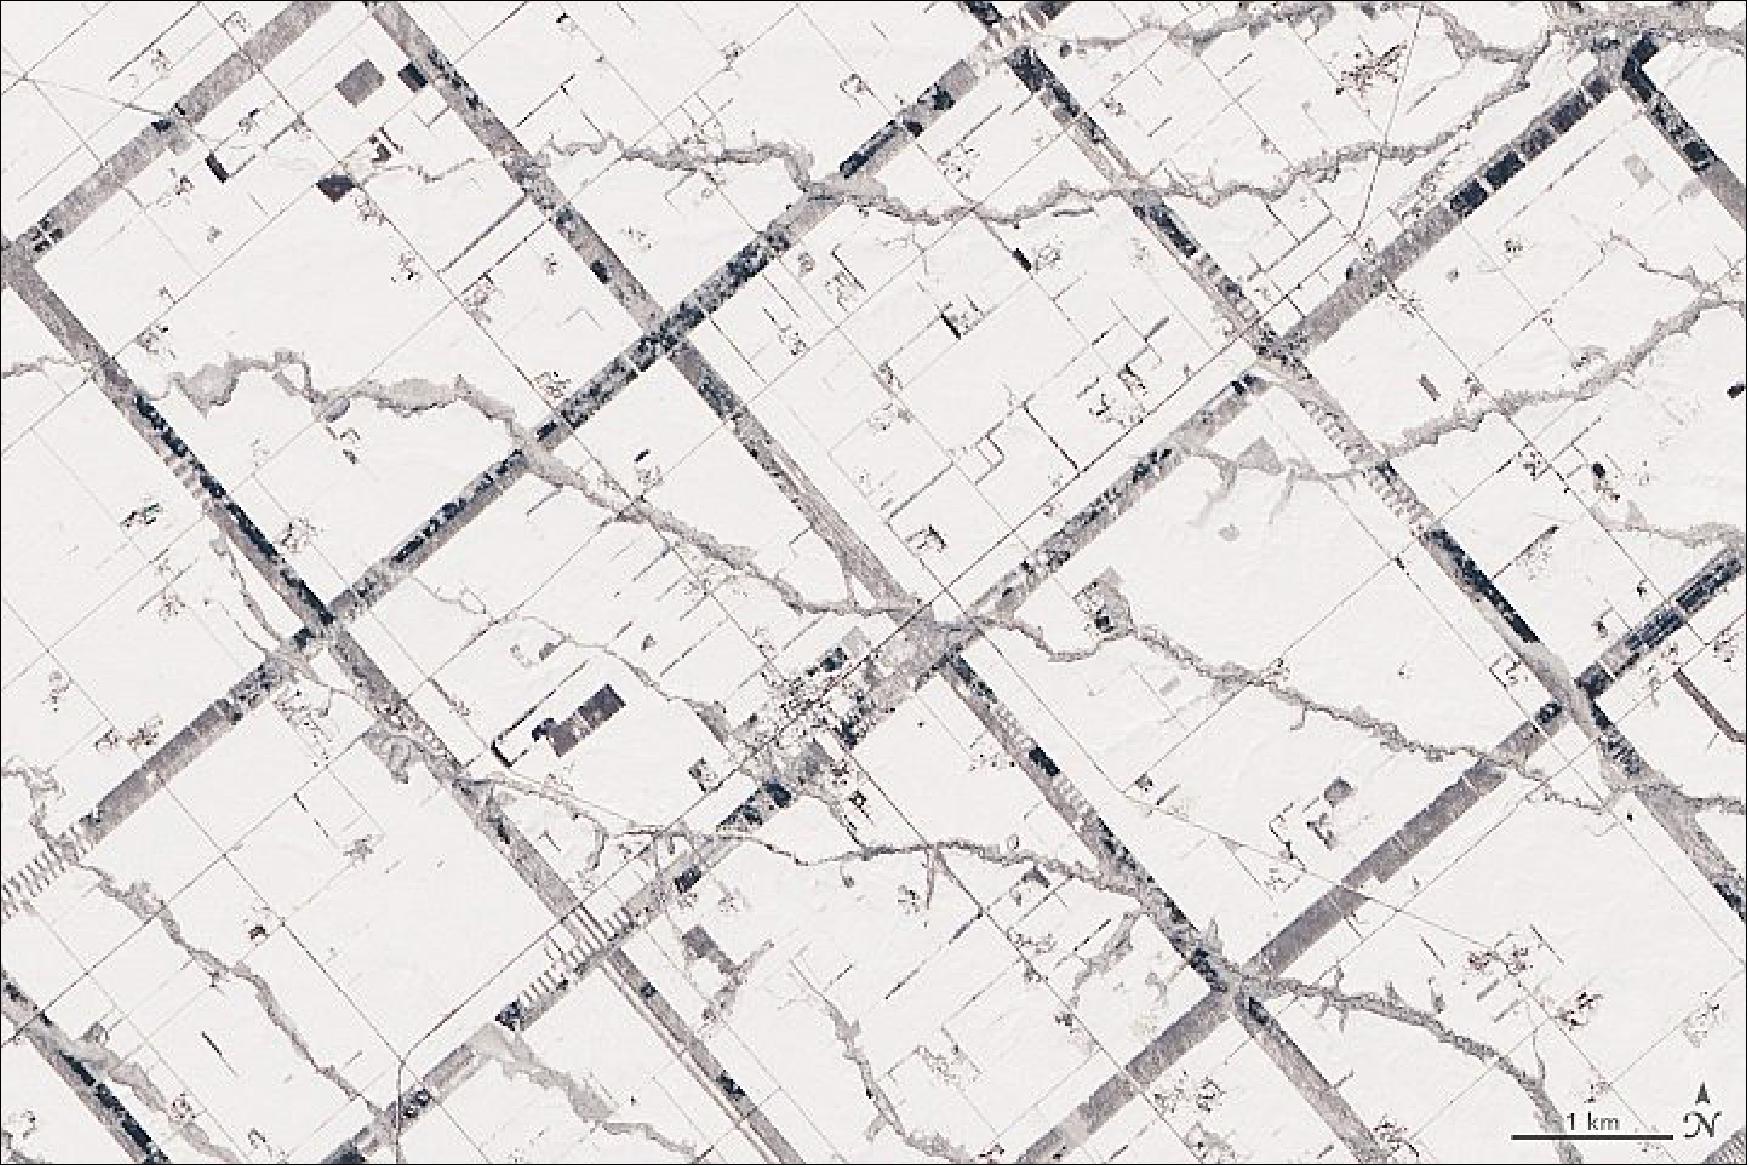 Figure 92: Wintery detail image of the windbreaker pattern acquired with OLI on 27 February 2020 (image credit: NASA Earth Observatory)